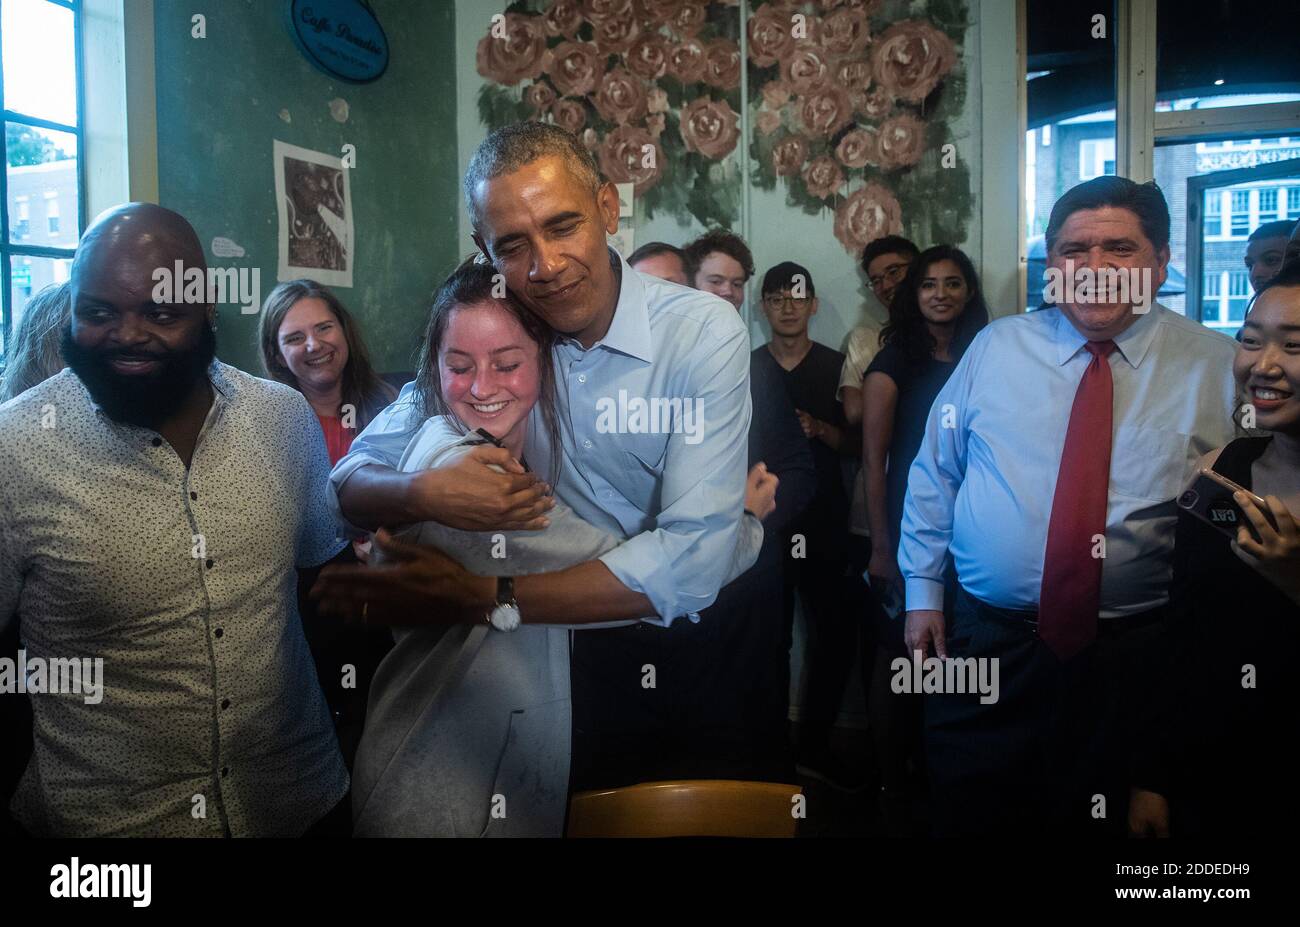 NO FILM, NO VIDEO, NO TV, NO DOCUMENTARY - Former president Barack Obama gives a hug to Rachel Peterson as he makes a campaign stop at Caffe Paradiso with Democratic gubernatorial candidate J.B. Pritzker, right, after speaking at University of Illinois in Urbana, IL, USA, on Friday, September 7, 2018. Photo by Zbigniew Bzdak/Chicago Tribune/TNS/ABACAPRESS.COM Stock Photo